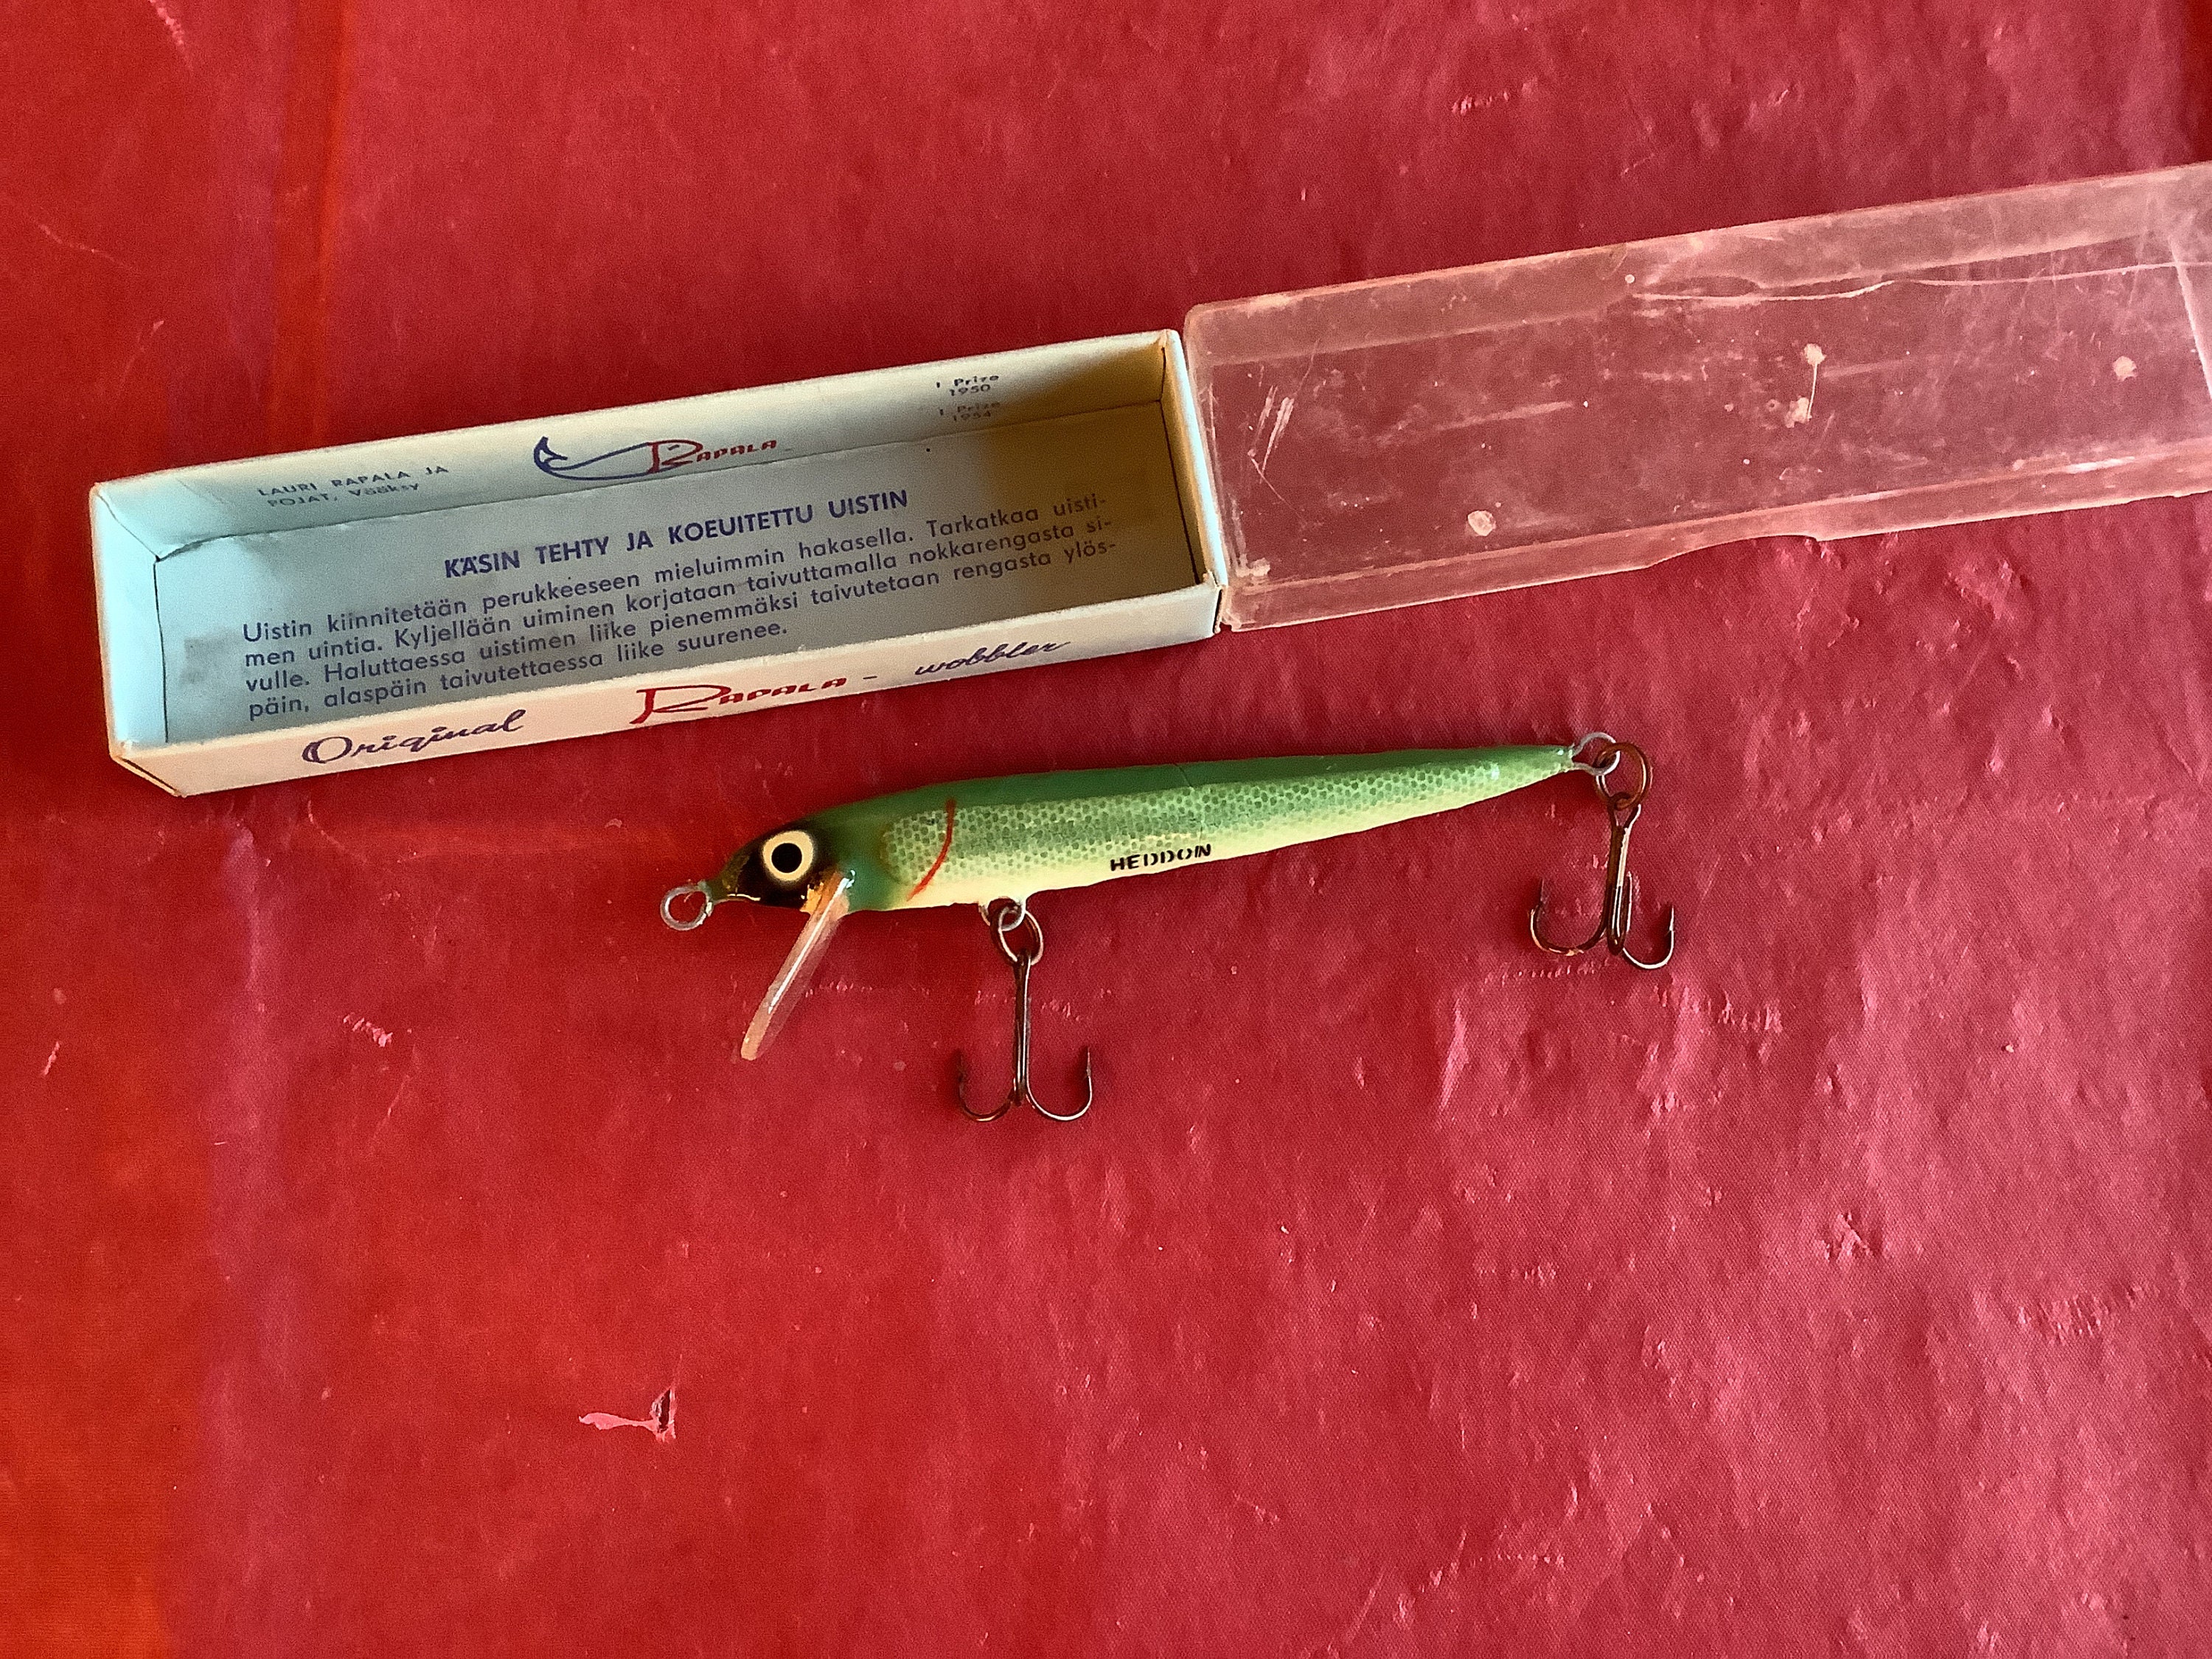 Original Rapala Wobbler Handmade and Test-floated Made in Finland